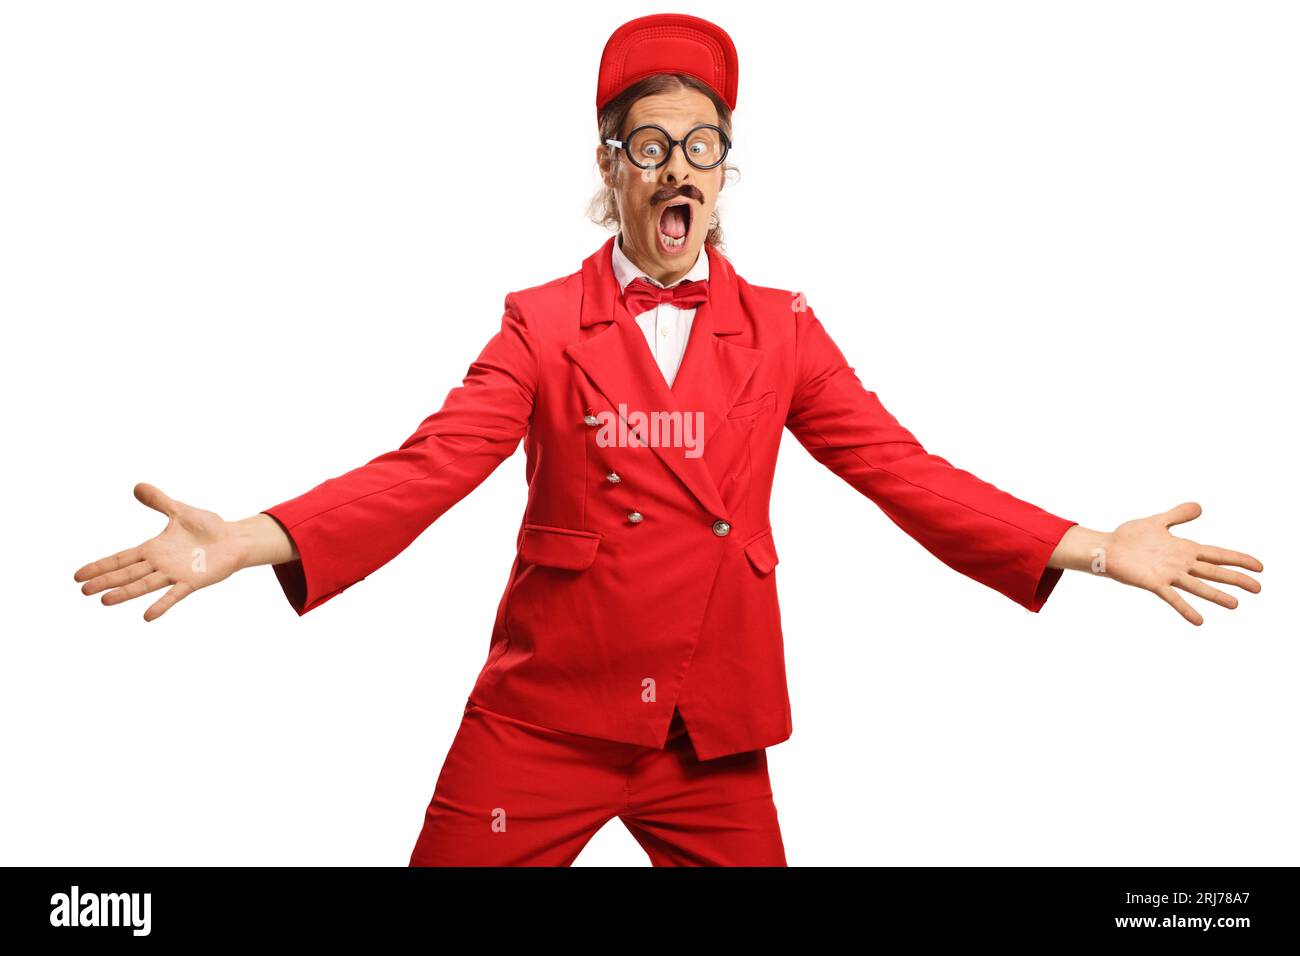 Entertainer in a red suit shouting isolated on white background Stock Photo